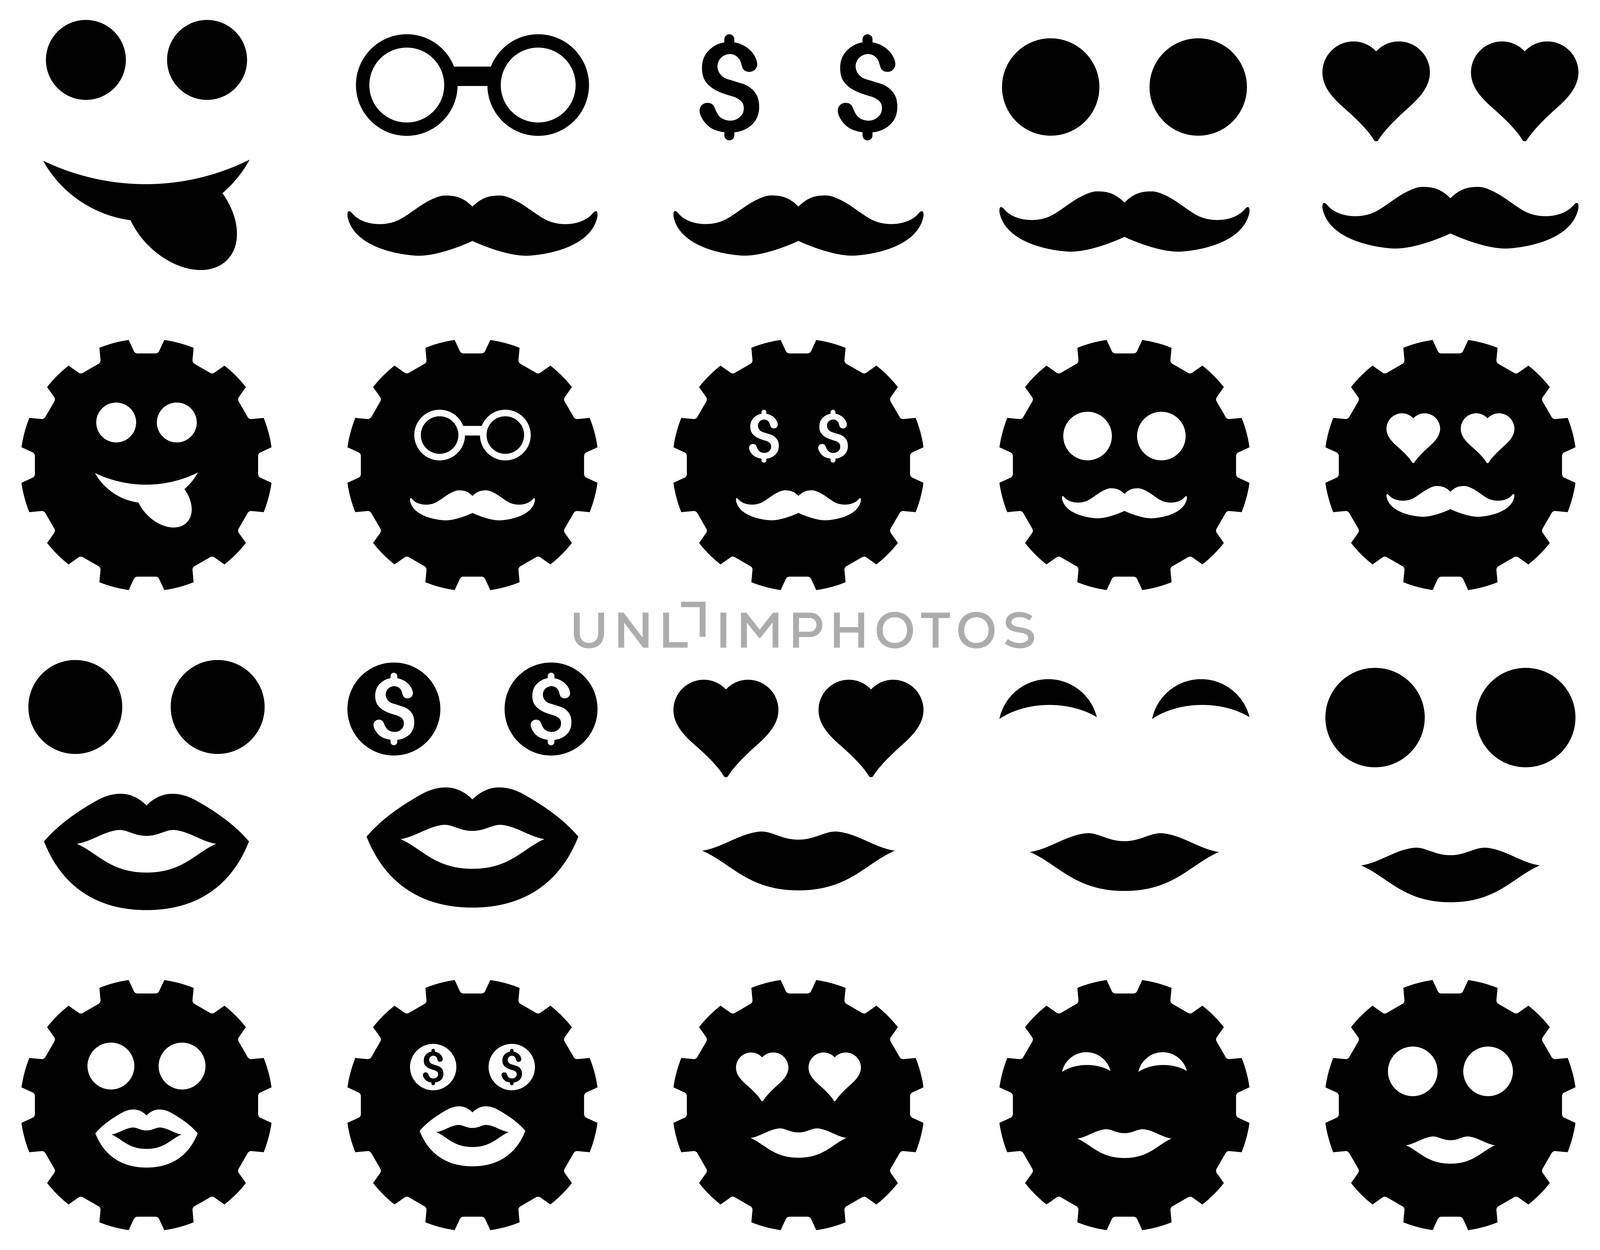 Gear and emotion icons. Glyph set style is flat images, black symbols, isolated on a white background.